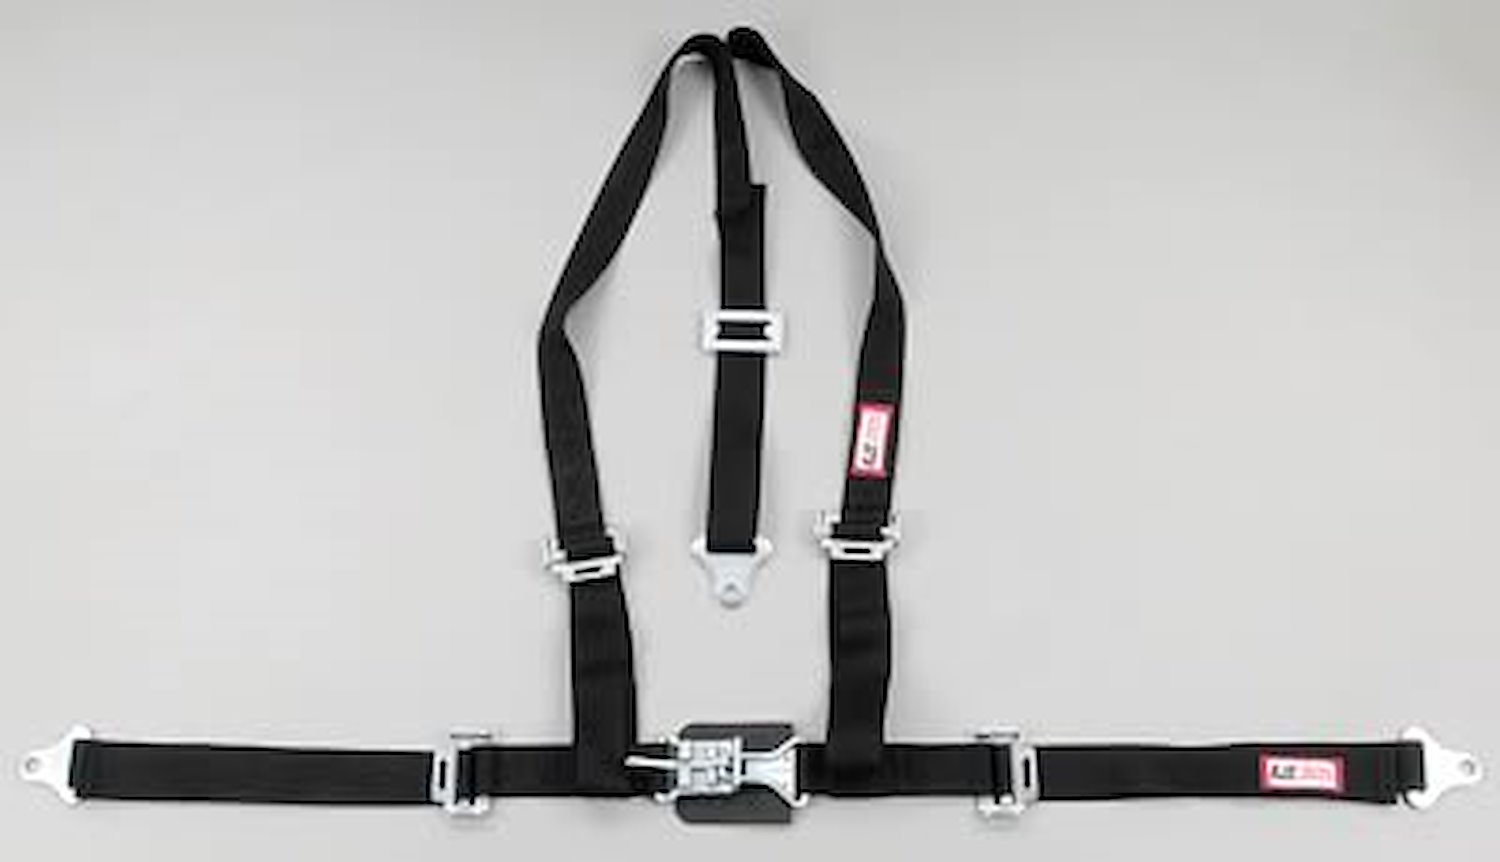 NON-SFI L&L HARNESS 3 PULL DOWN Lap Belt w/adjuster 2 S.H. Individual FLOOR Mount w/STERNUM STRAP ALL WRAP ENDS BLACK